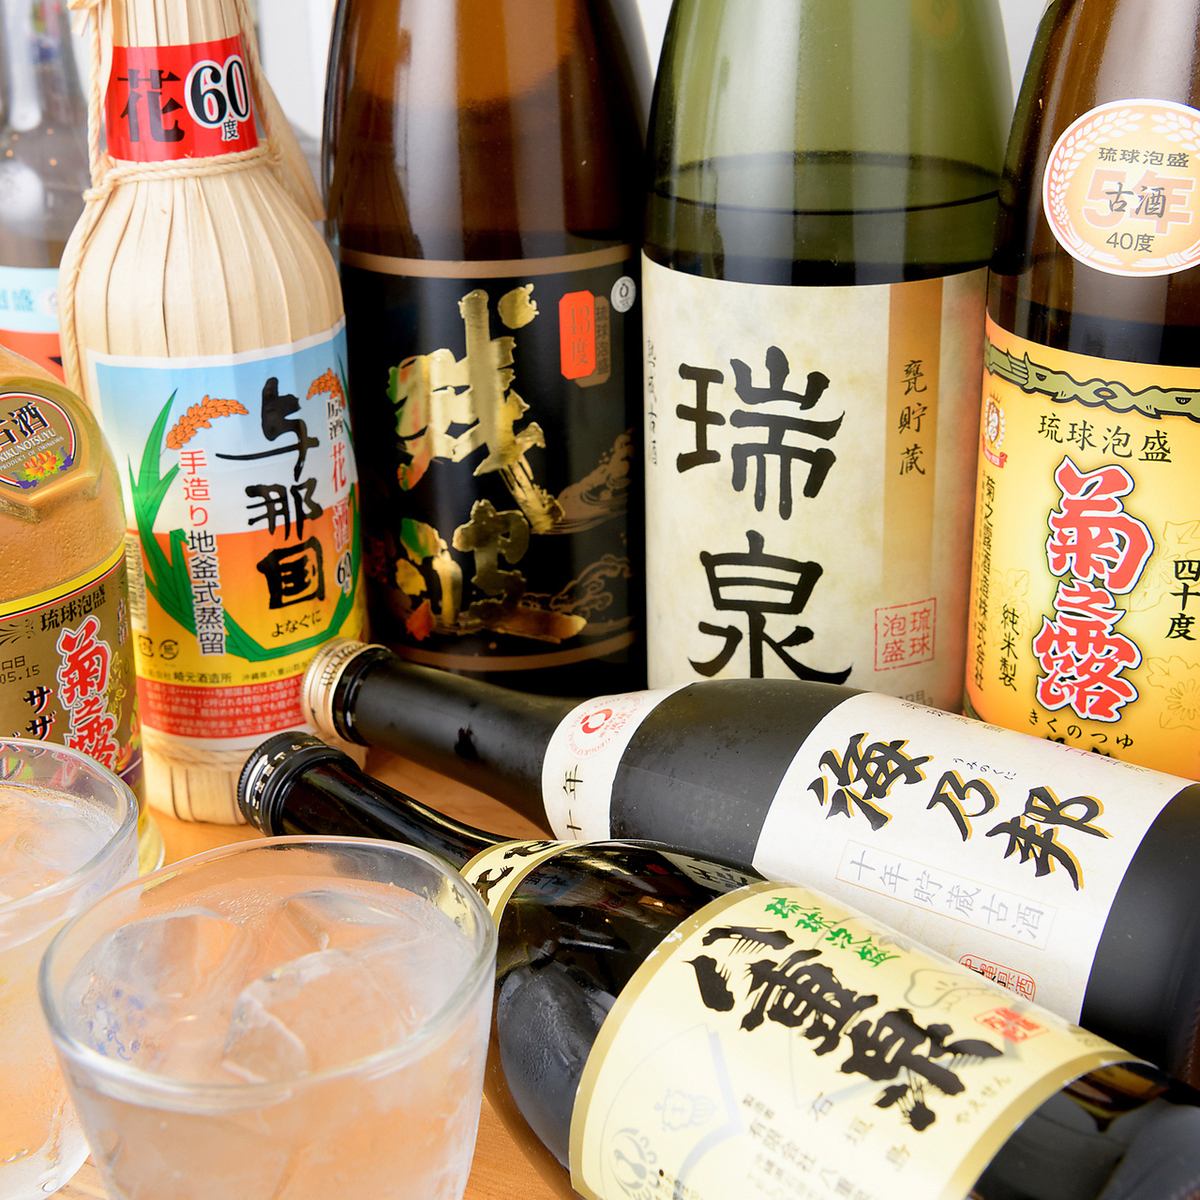 You can keep the bottle of shochu and awamori